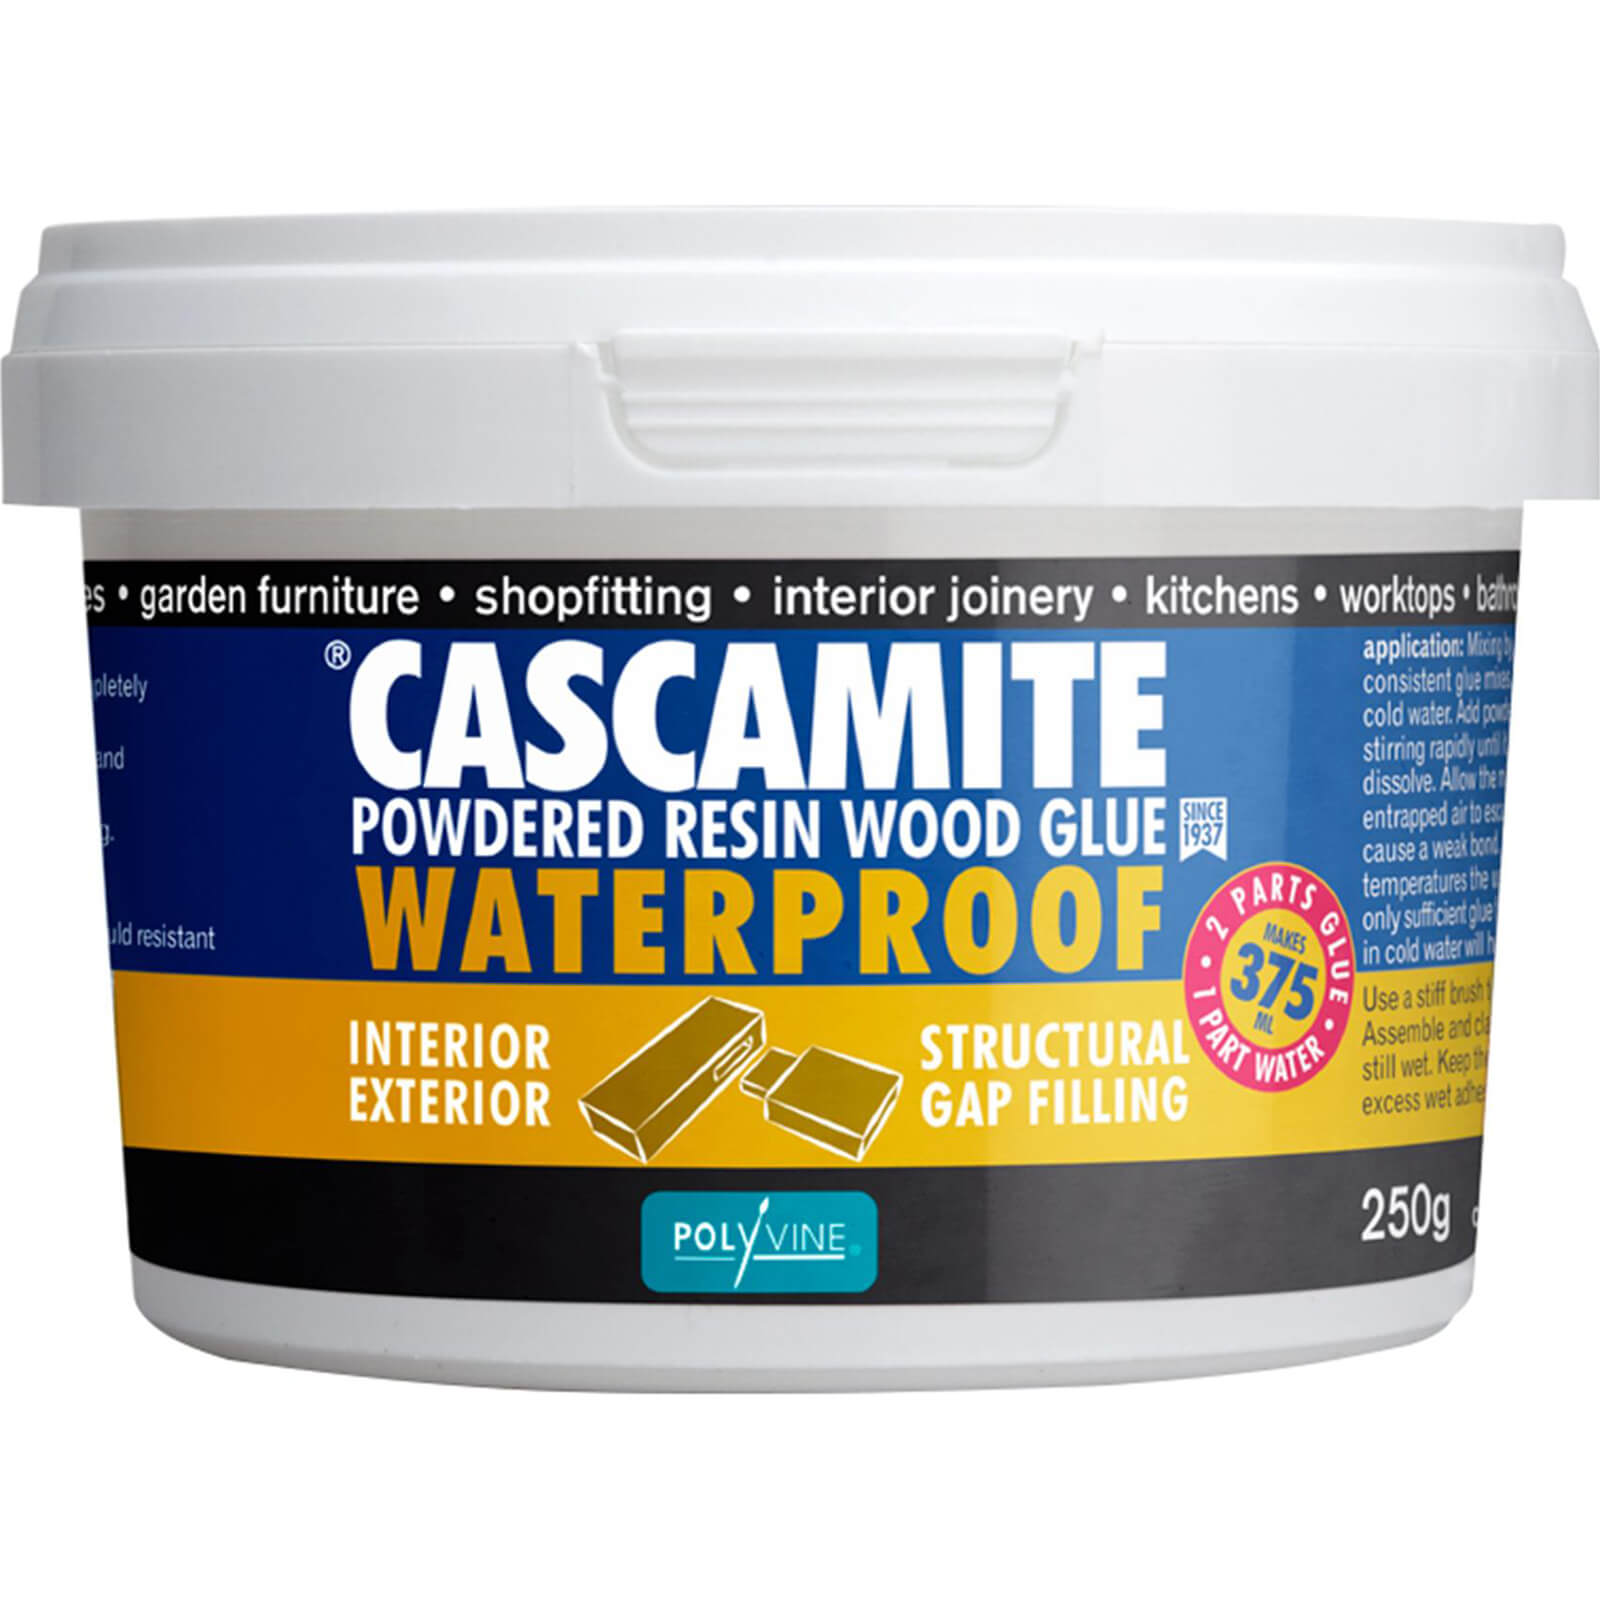 Image of Humbrol Cascamite One Shot Wood Adhesive 220g